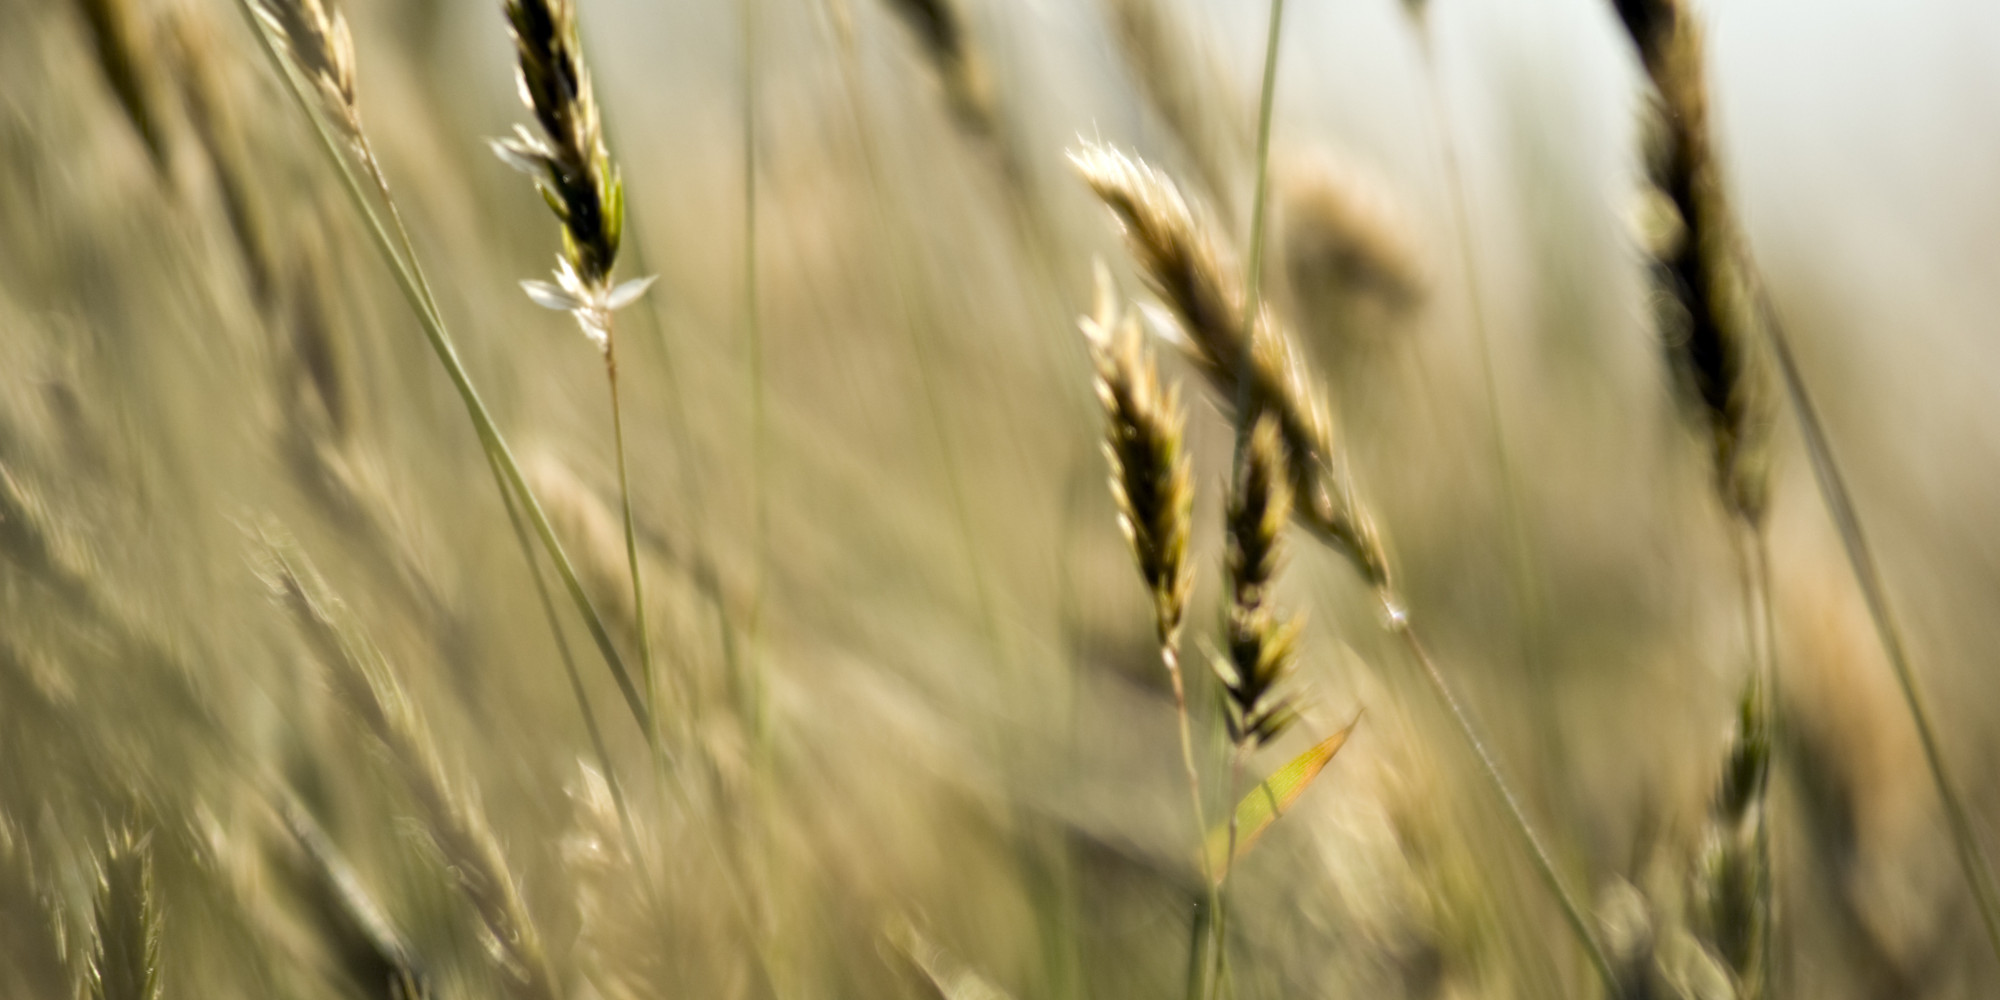 The Truth About Toxic Wheat | HuffPost